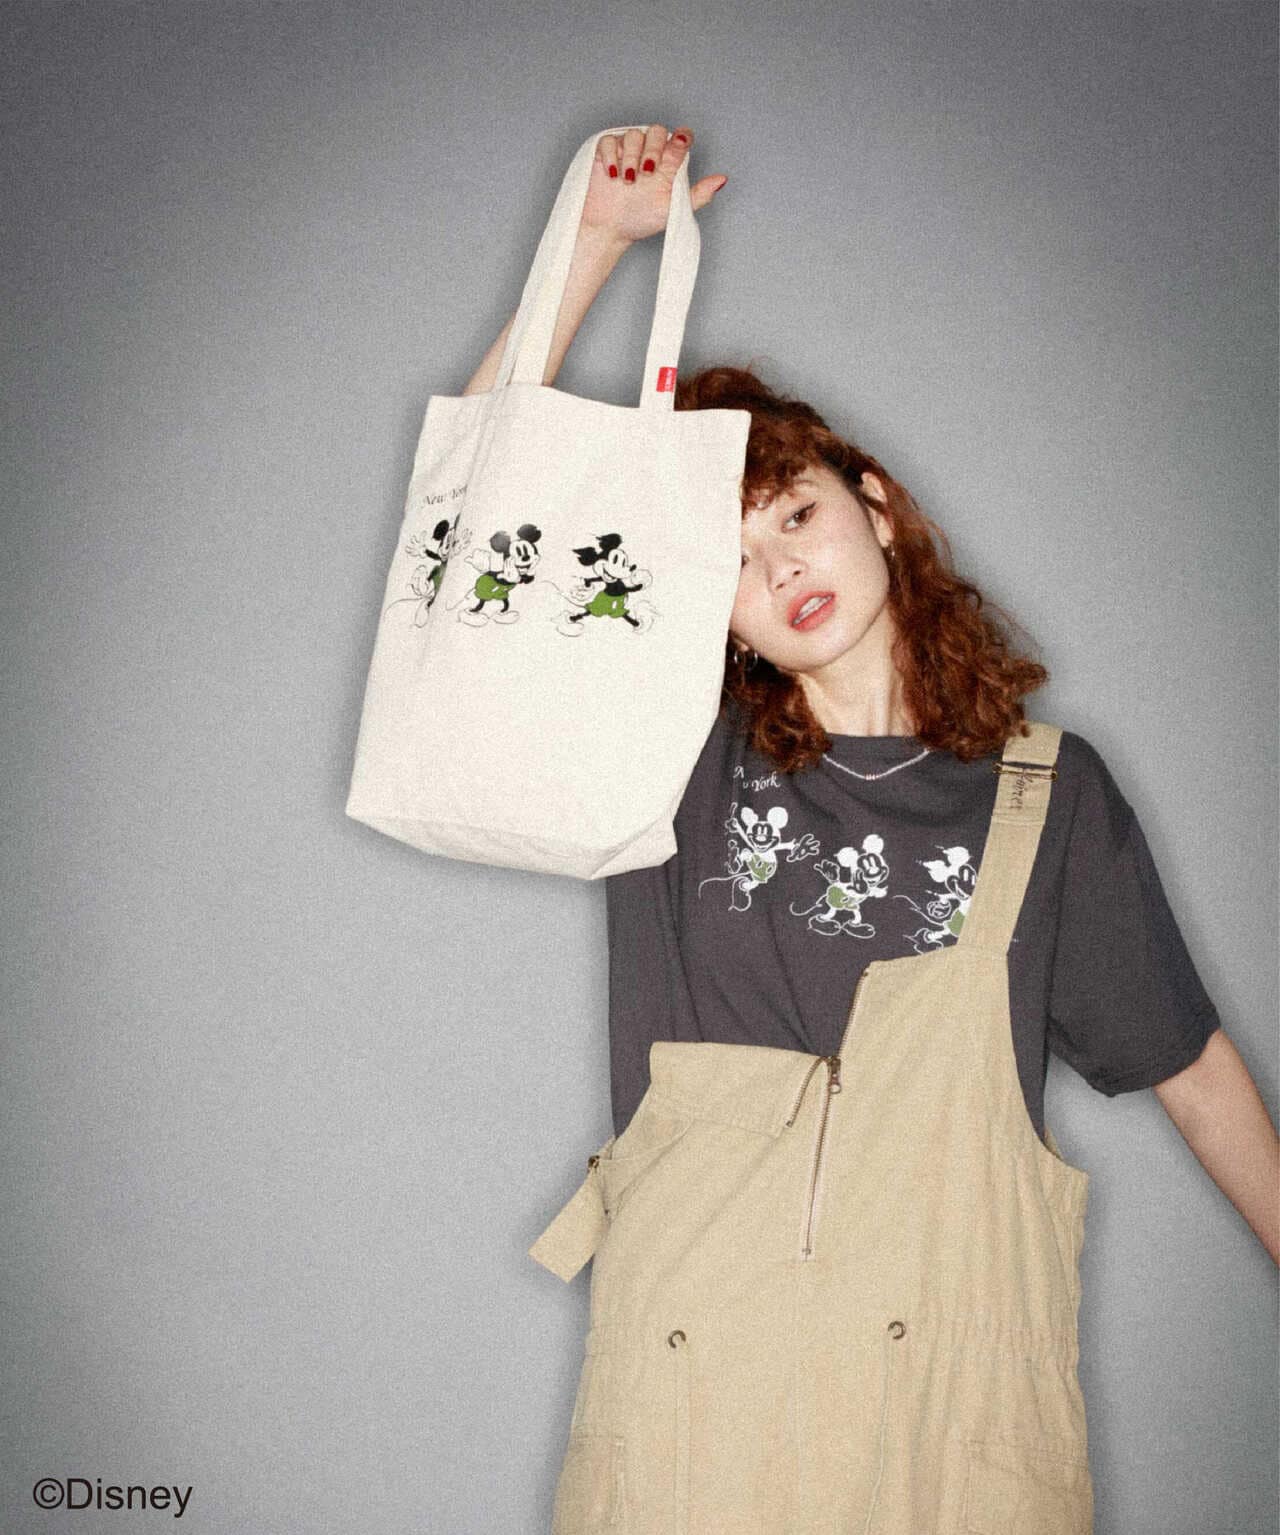 AVIREX/MICKEY MOUSE 333 TOTE BAG/ アヴィレックス/ミッキーマウス 333 トートバッグ